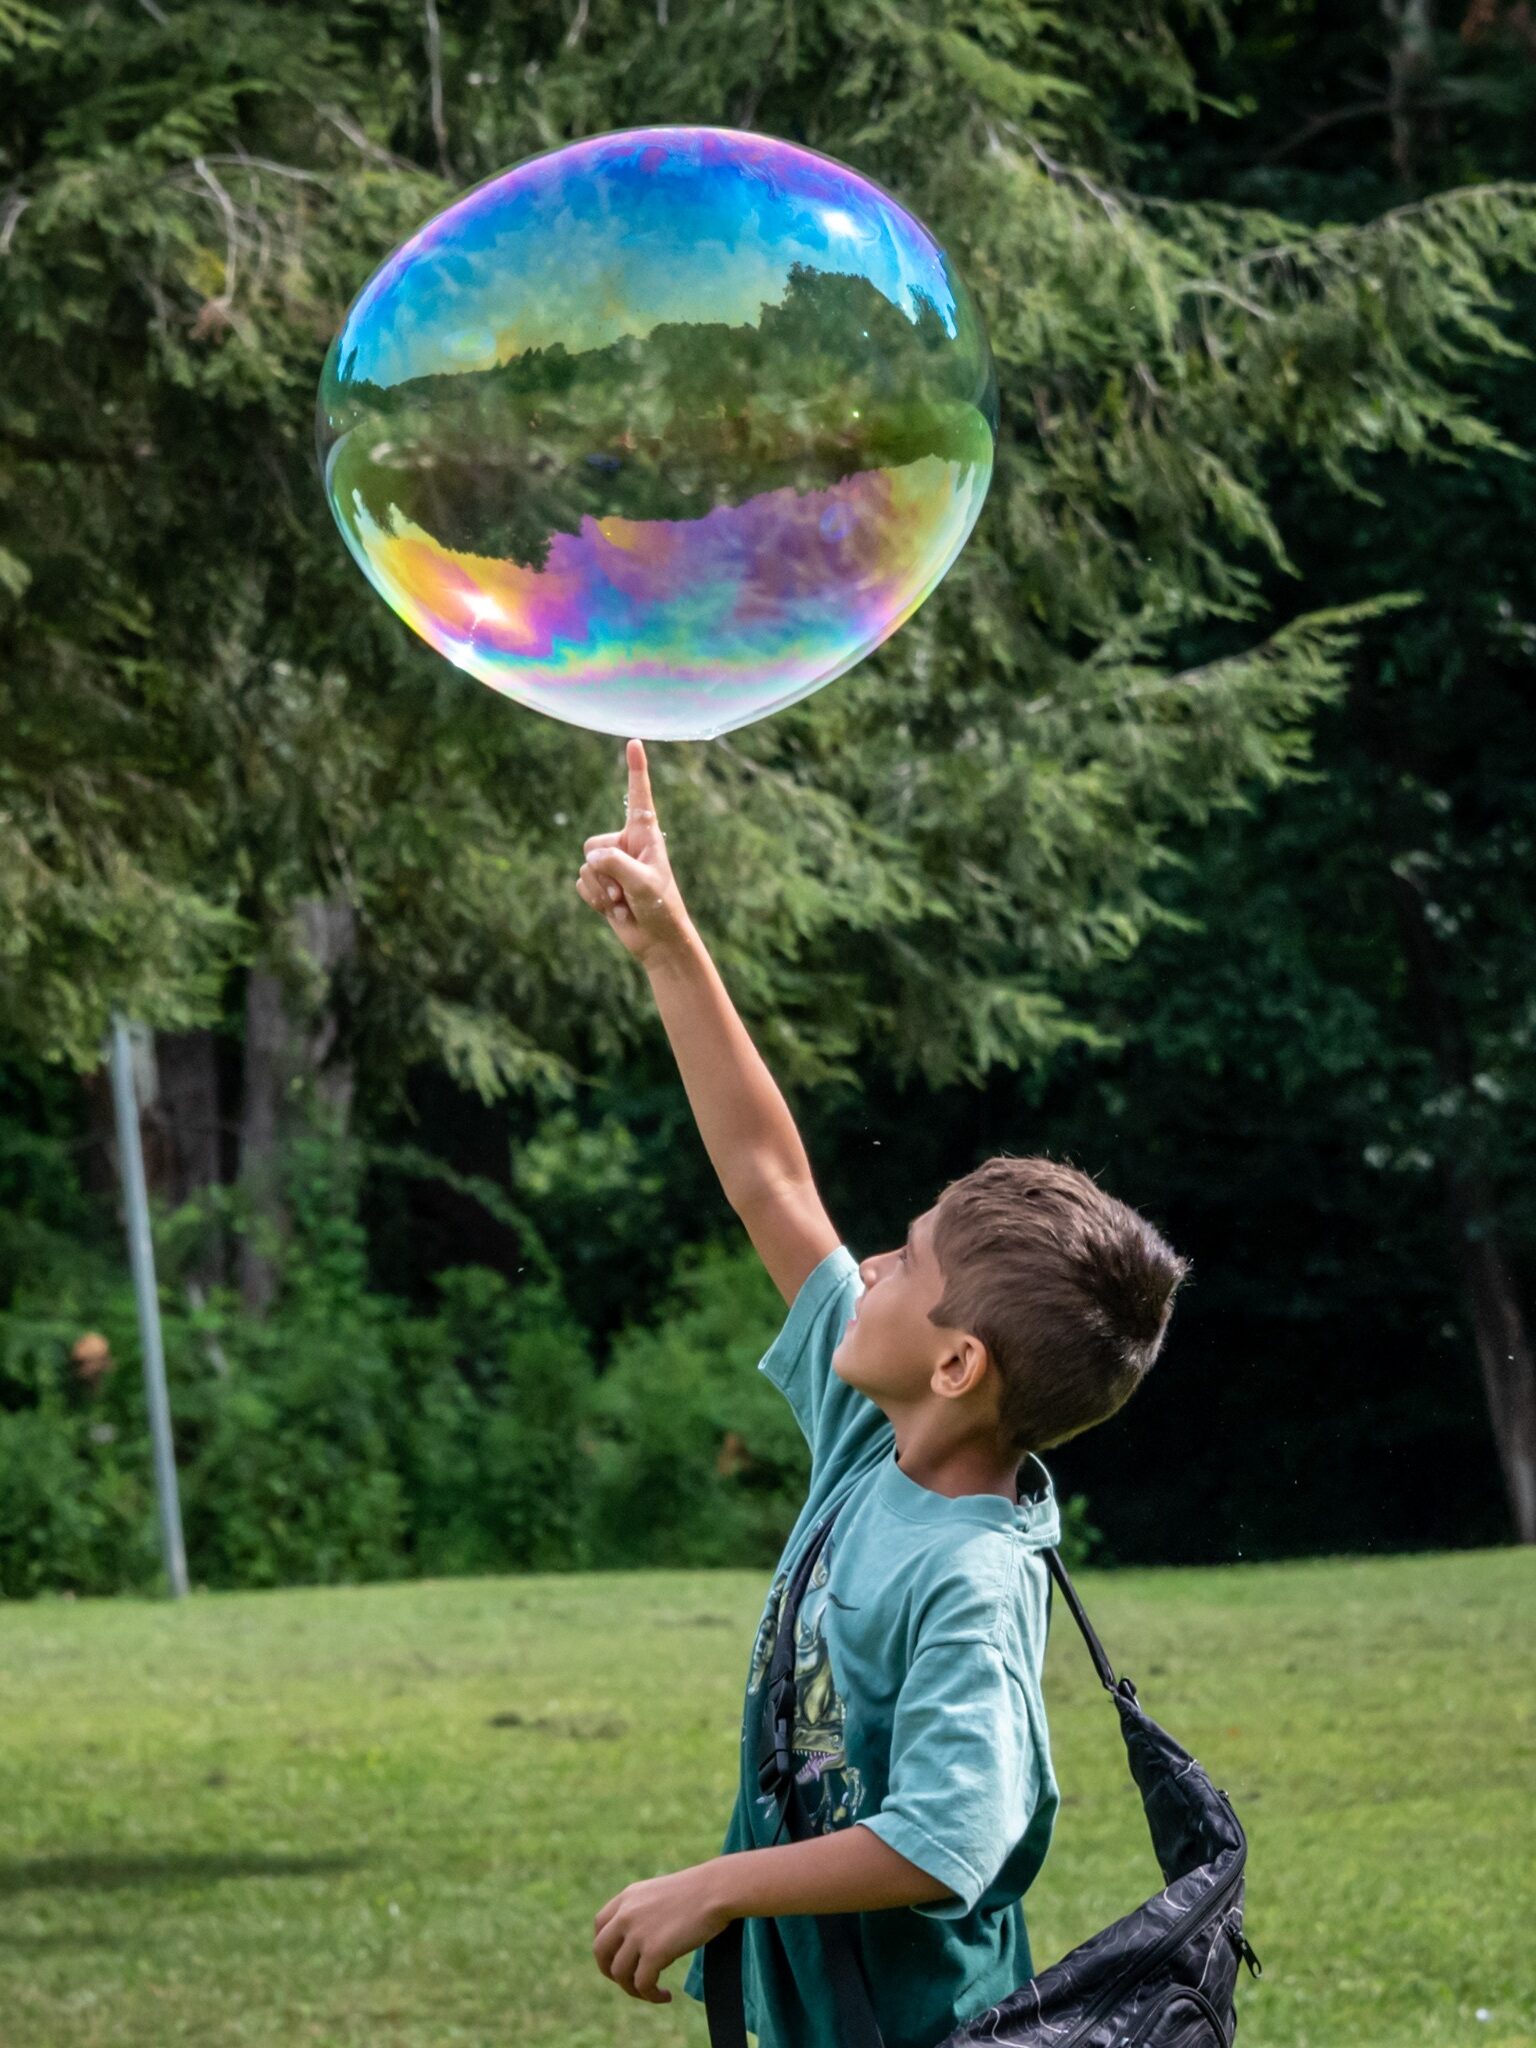 Young boy with a backpack popping a giant bubble